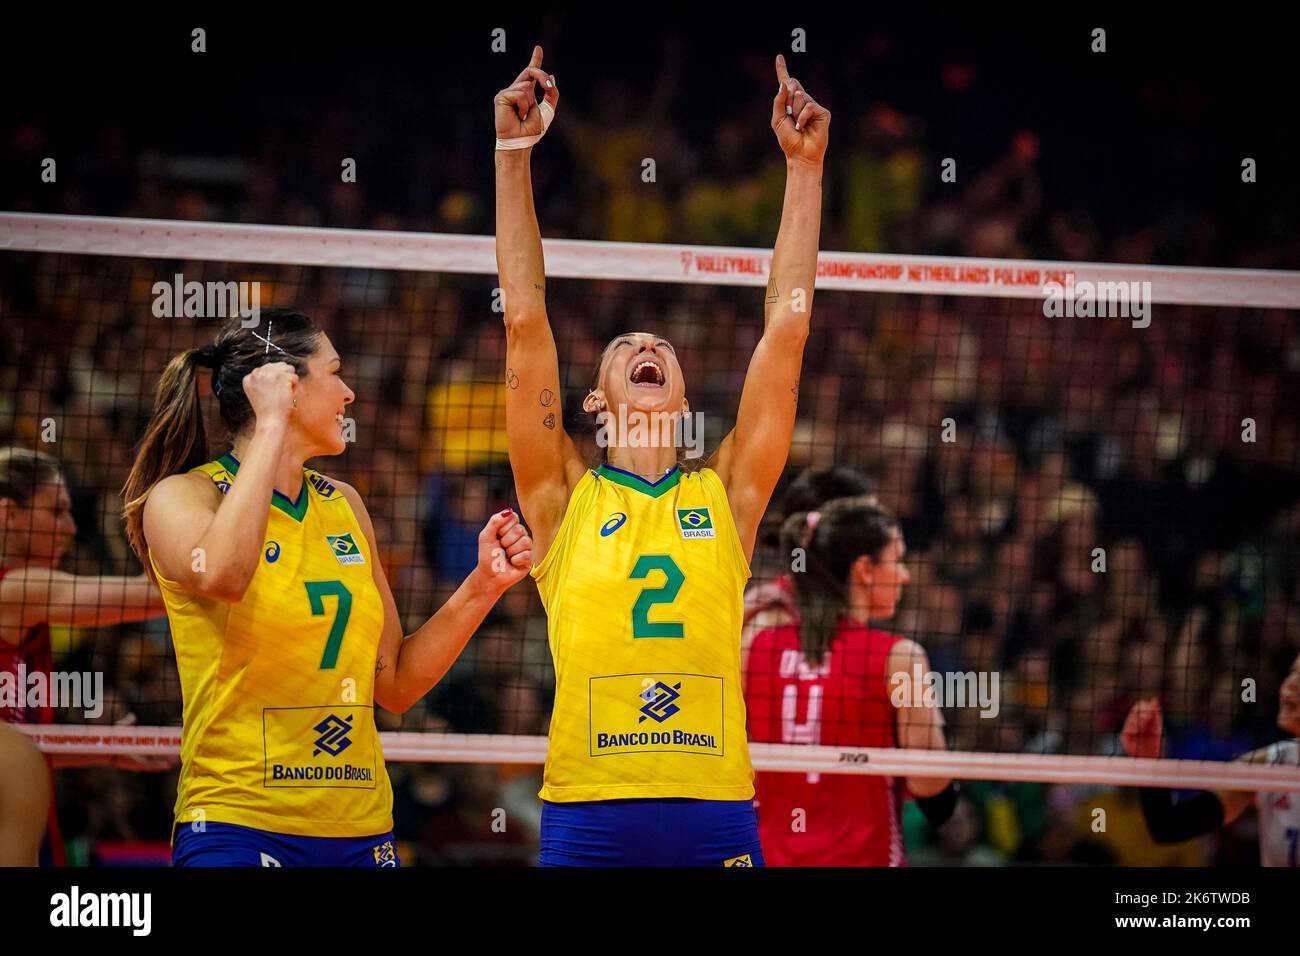 Apeldoorn, Netherlands. 15th Oct, 2022. APELDOORN, NETHERLANDS - OCTOBER 15: Rosamaria Montibeller of Brazil and Caroline De Oliveira Saad Gattaz of Brazil celebrate a point during the Final match between Brazil and Serbia on Day 20 of the FIVB Volleyball Womens World Championship 2022 at the Omnisport Apeldoorn on October 15, 2022 in Apeldoorn, Netherlands (Photo by Rene Nijhuis/Orange Pictures) Credit: Orange Pics BV/Alamy Live News Stock Photo